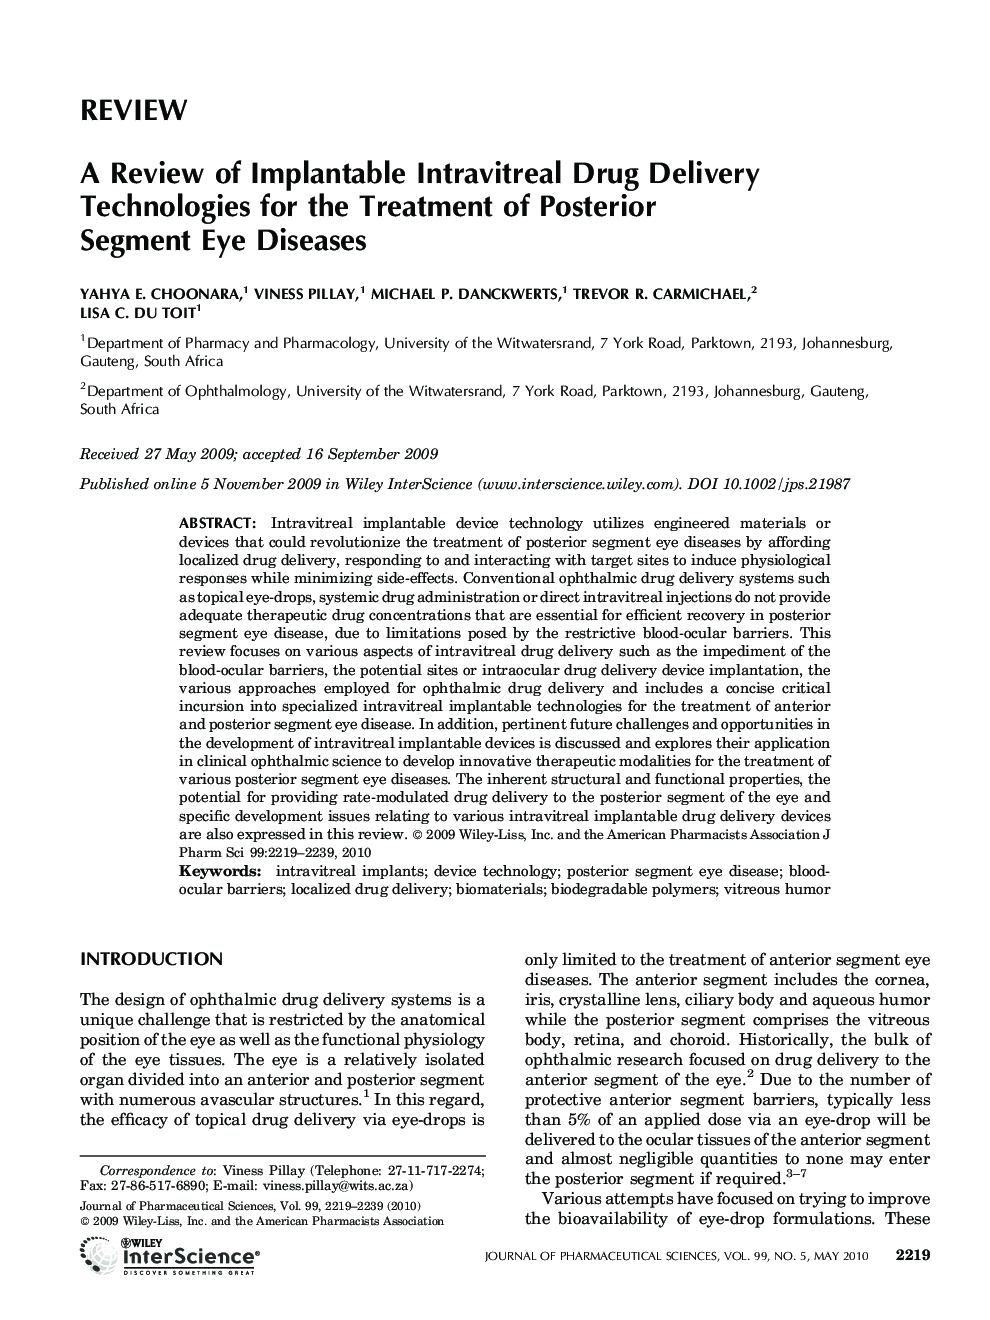 A review of implantable intravitreal drug delivery technologies for the treatment of posterior segment eye diseases